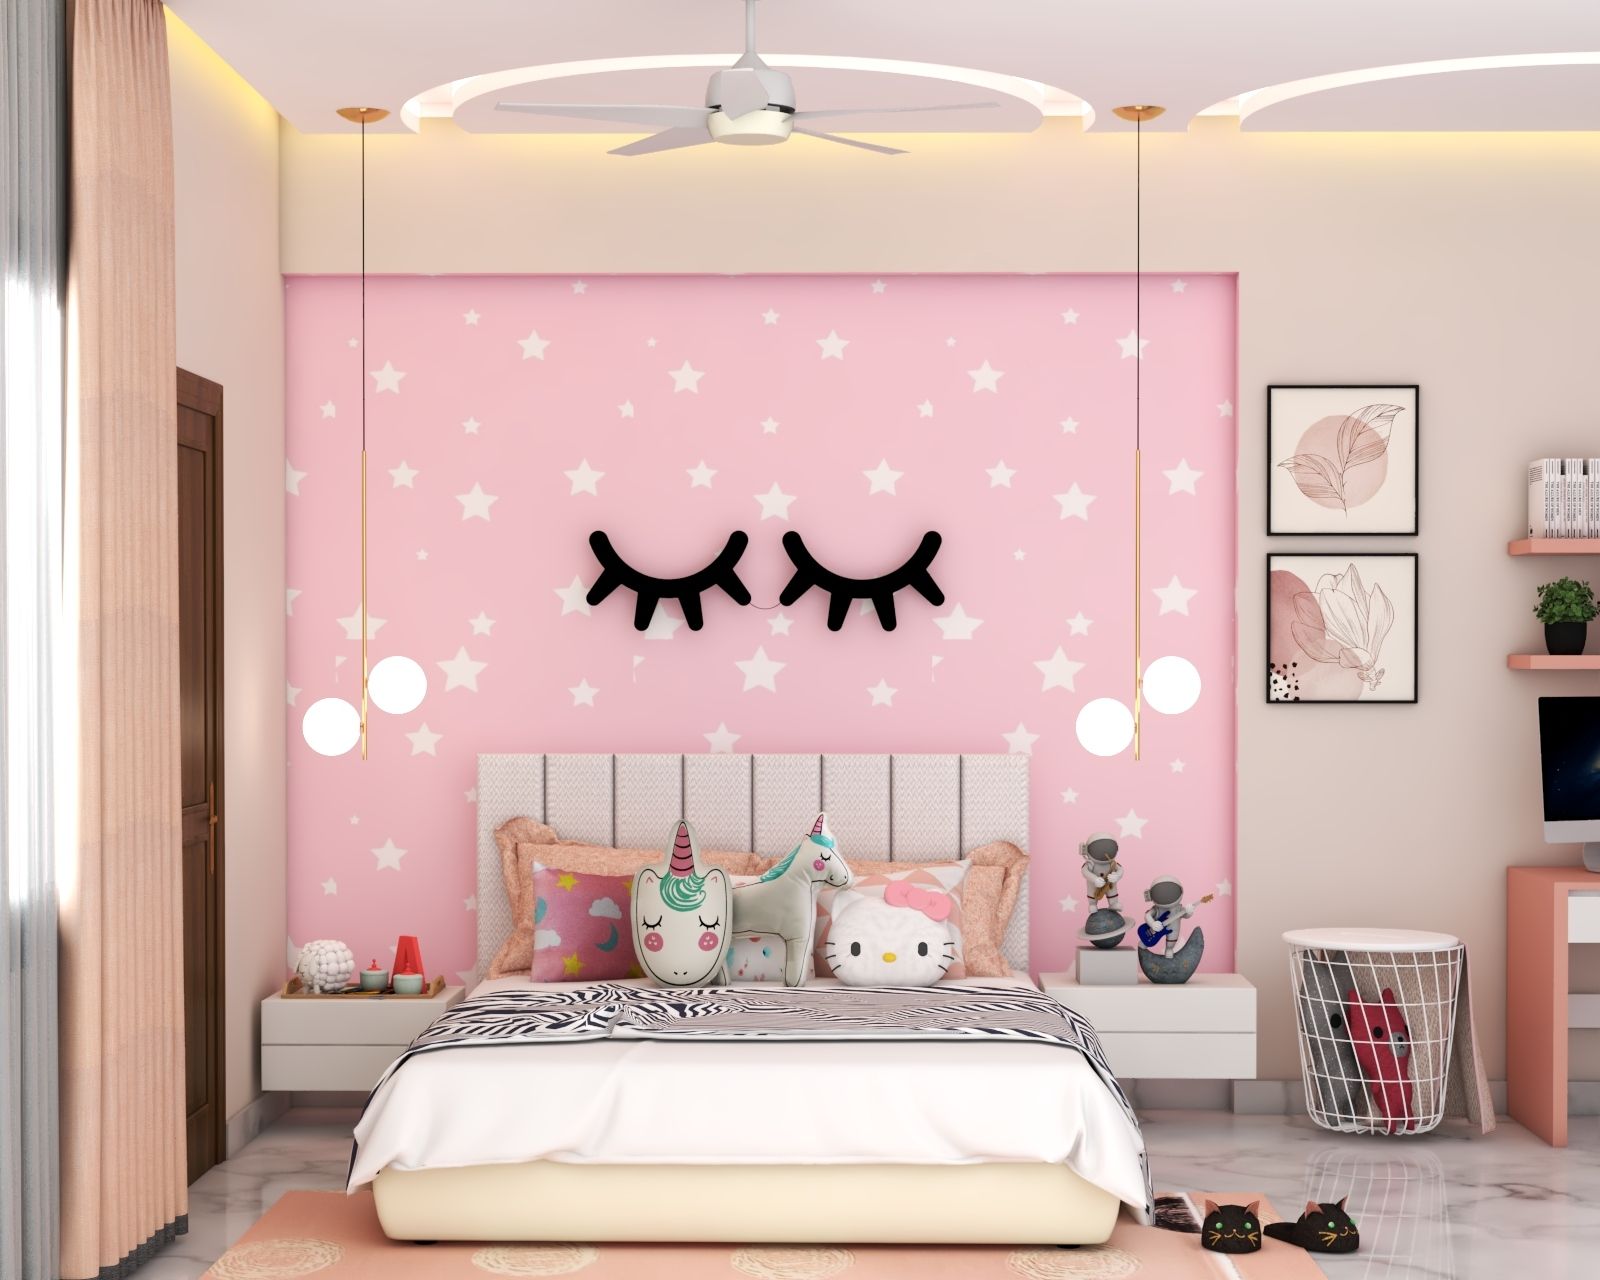 Contemporary Kids Room With A Queen Size Bed And A Bright Pink Wallpaper